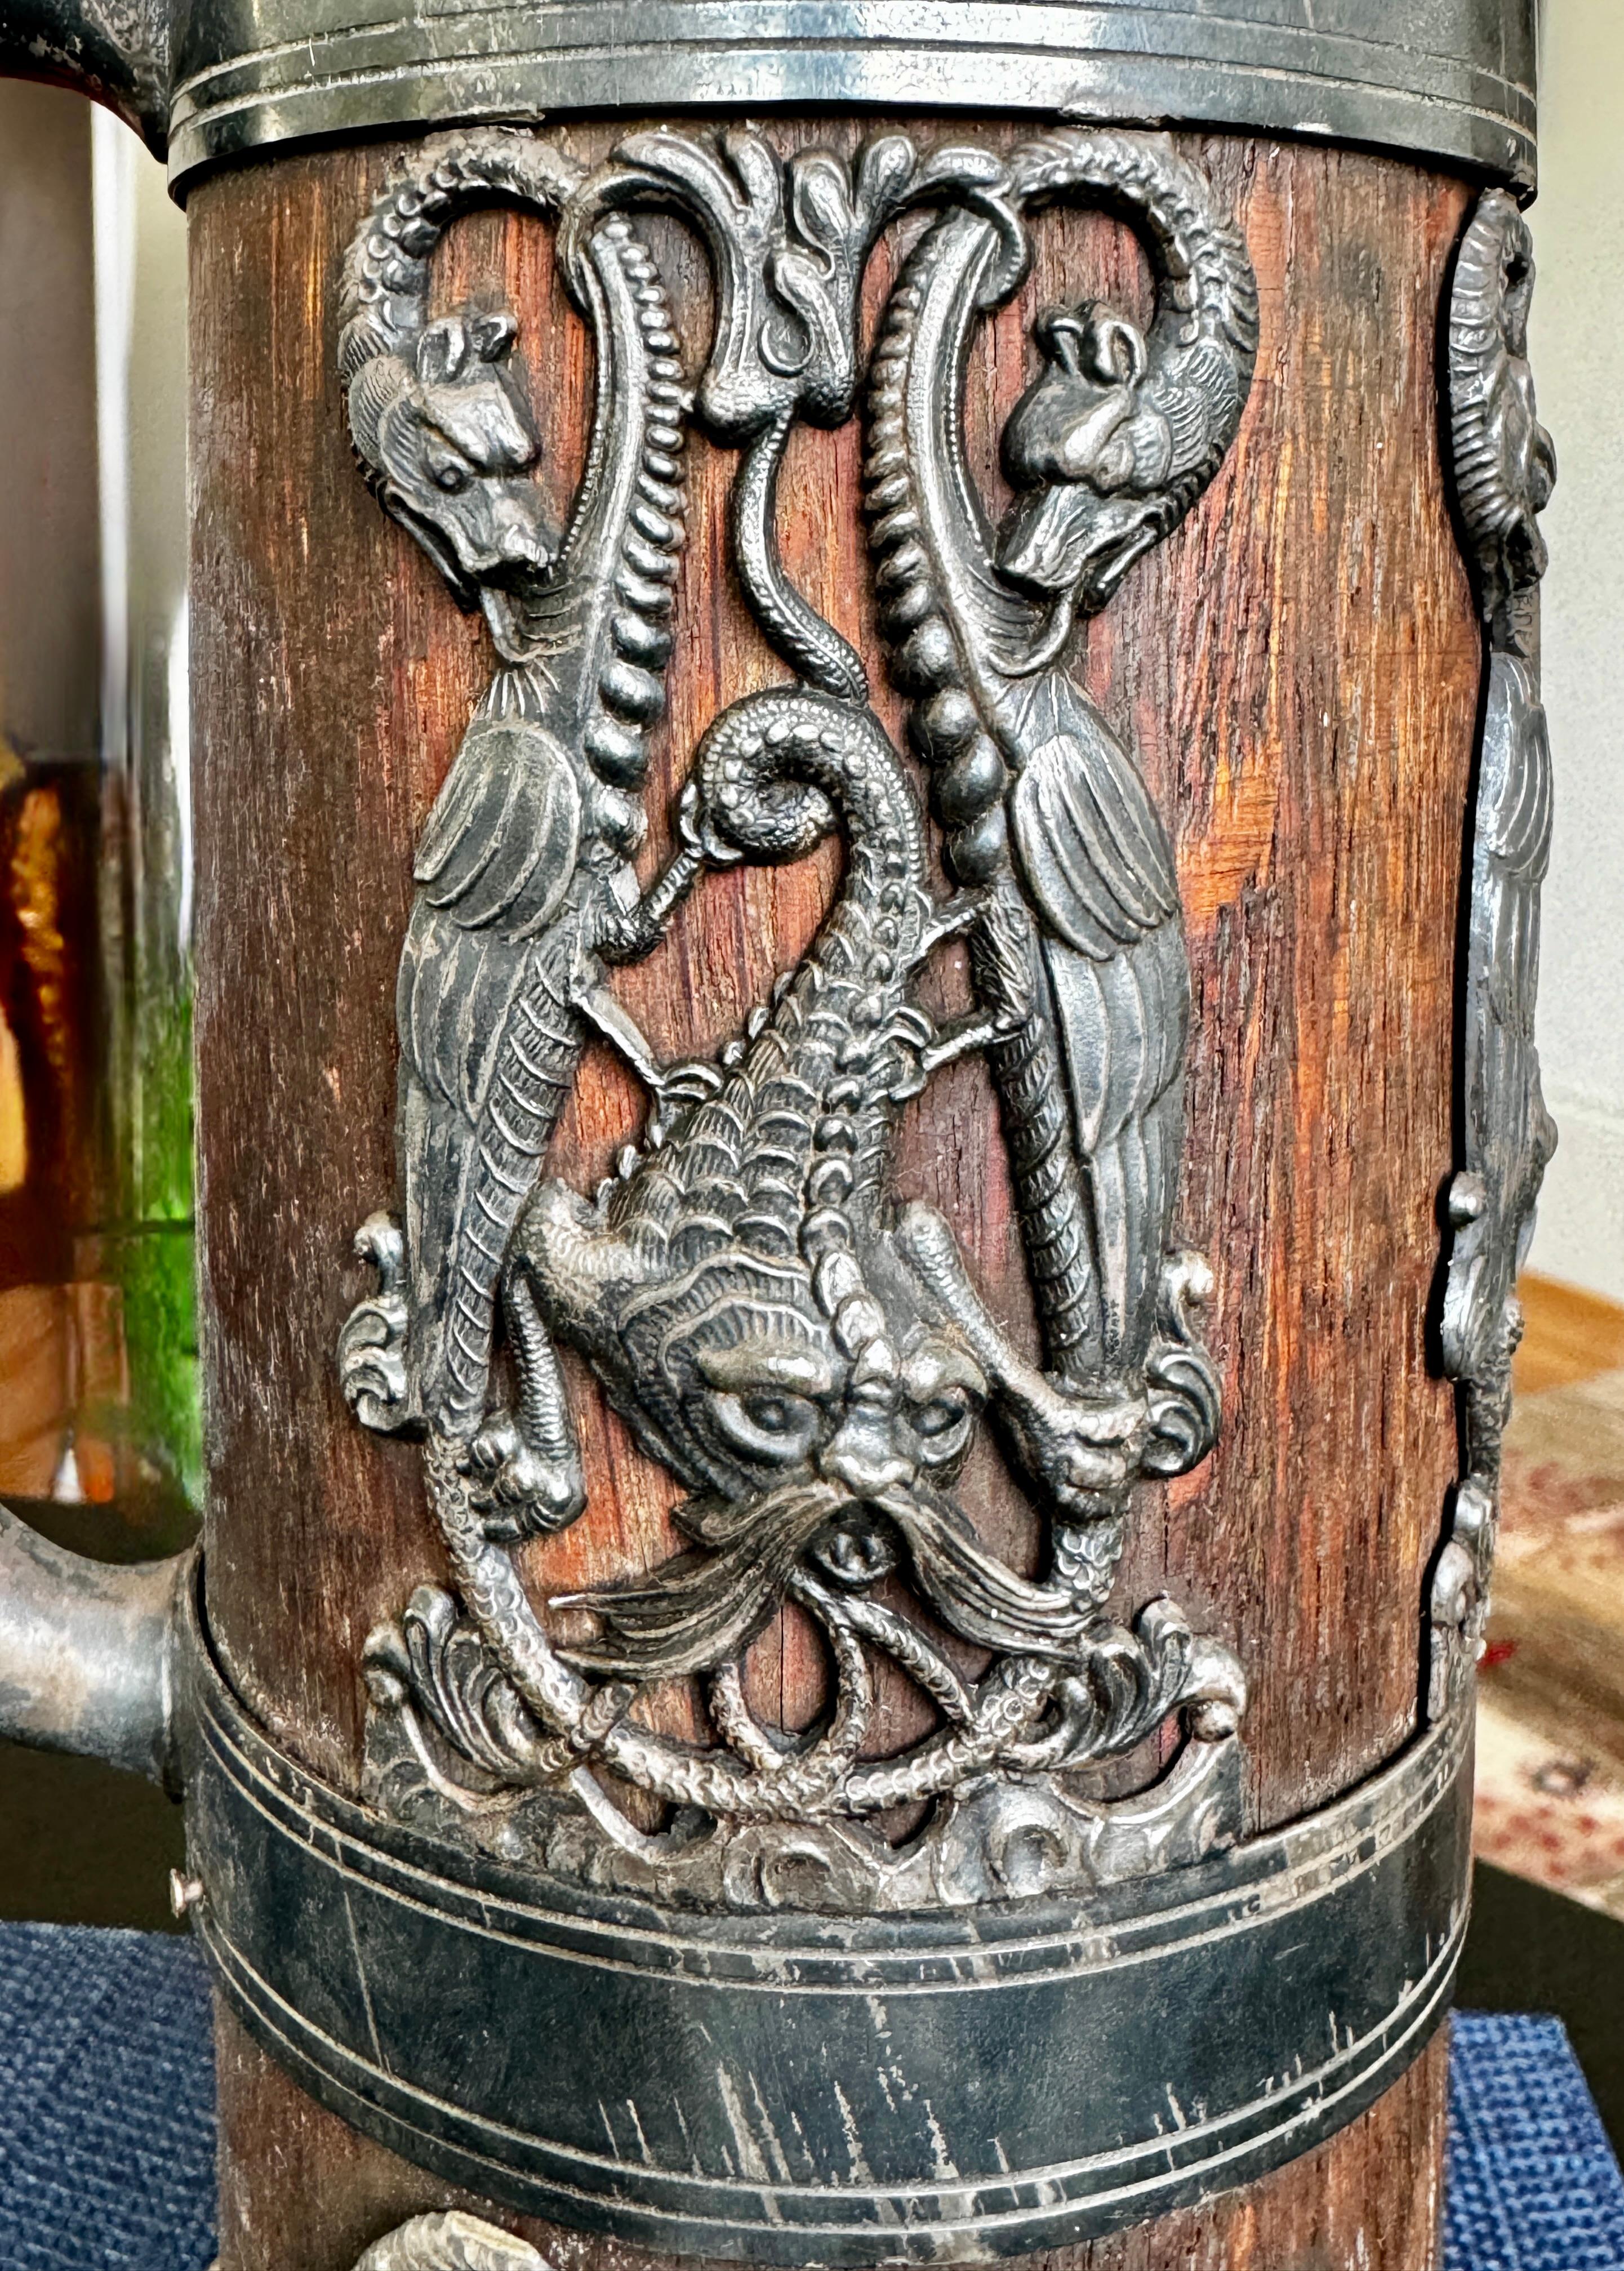 19th Century Pewter and Wood Kronheim Oldenbusch Stein

Decorated with fantasy dragon and walrus with tails of seals

11.5